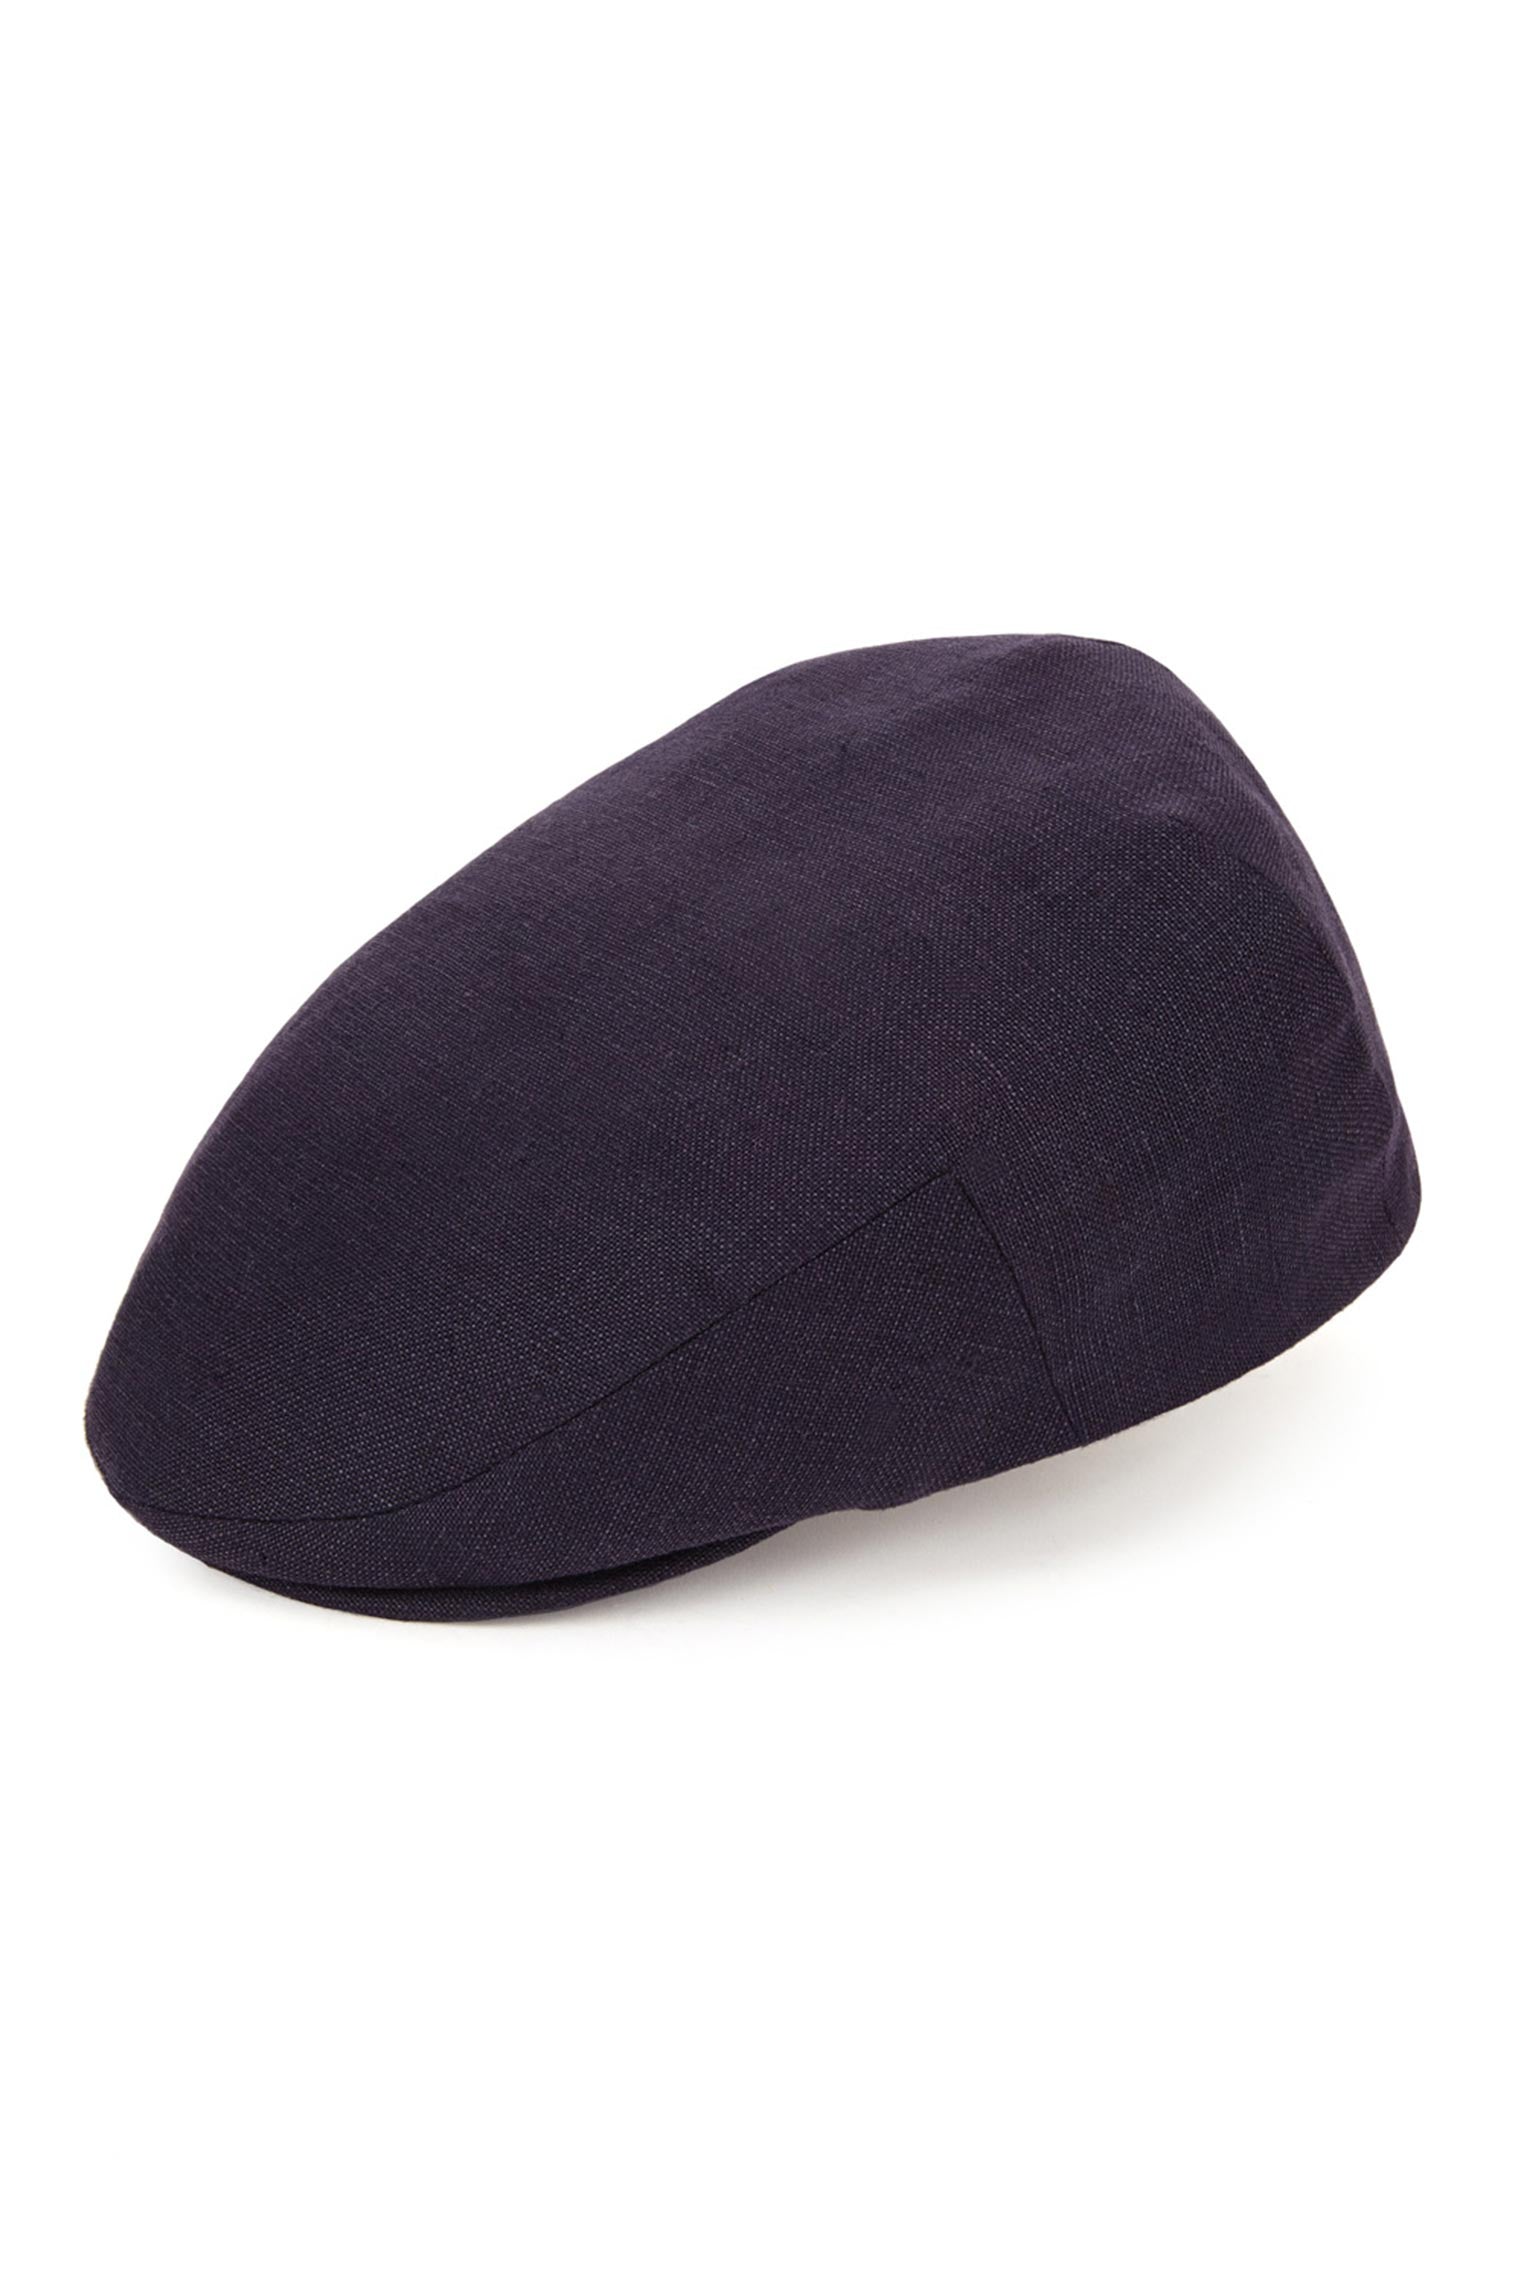 Florida Linen Flat Cap - Hats for Oval Face Shapes - Lock & Co. Hatters London UK